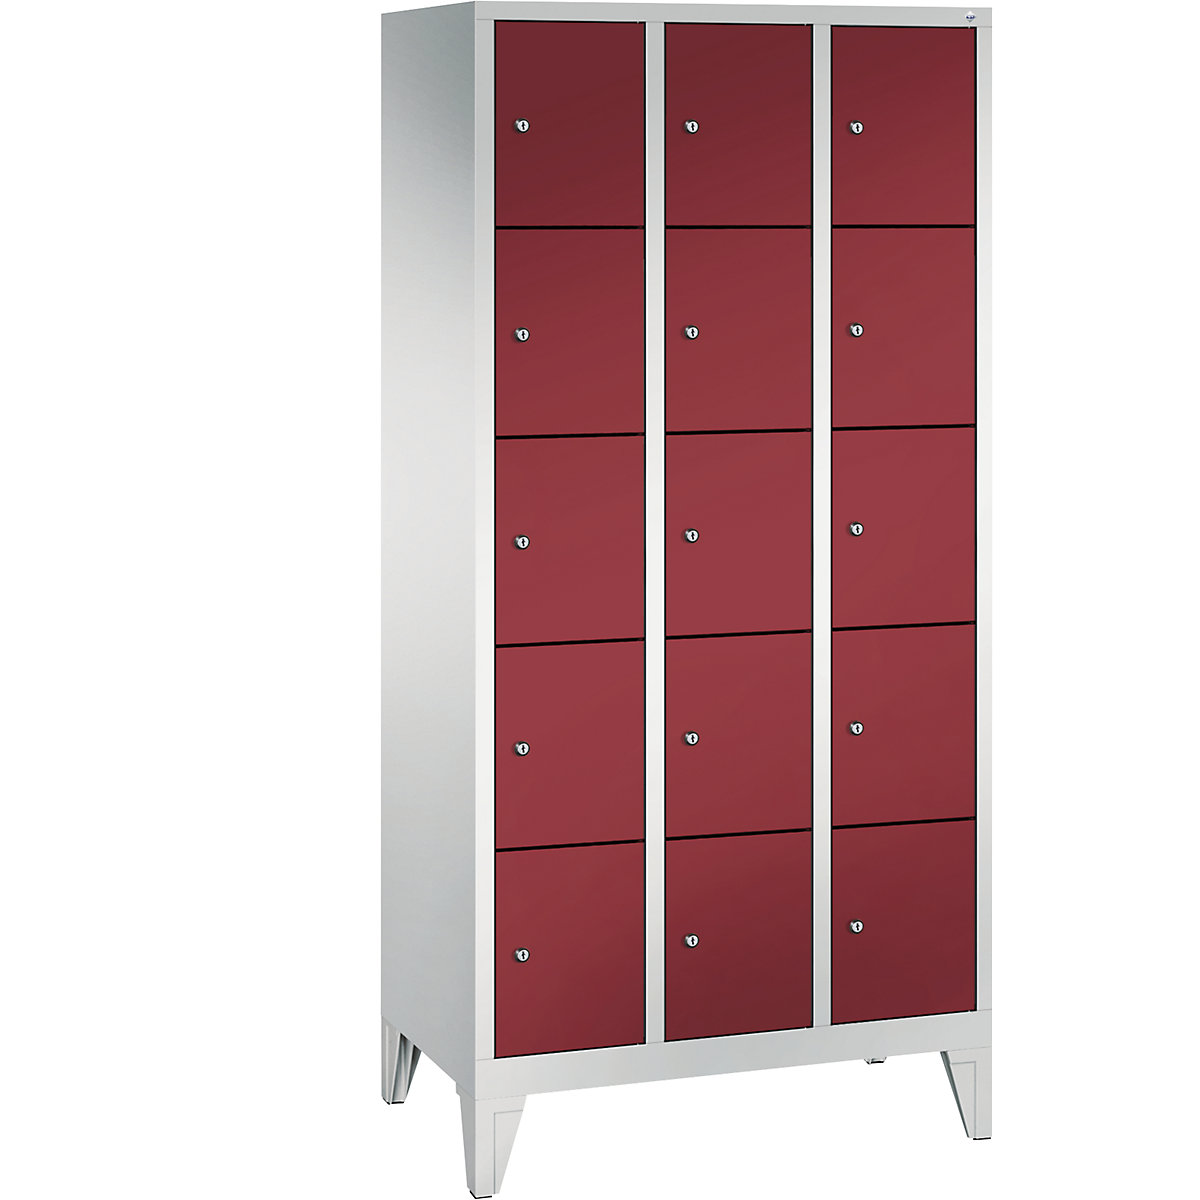 CLASSIC locker unit with feet – C+P, 3 compartments, 5 shelf compartments each, compartment width 300 mm, light grey / ruby red-10